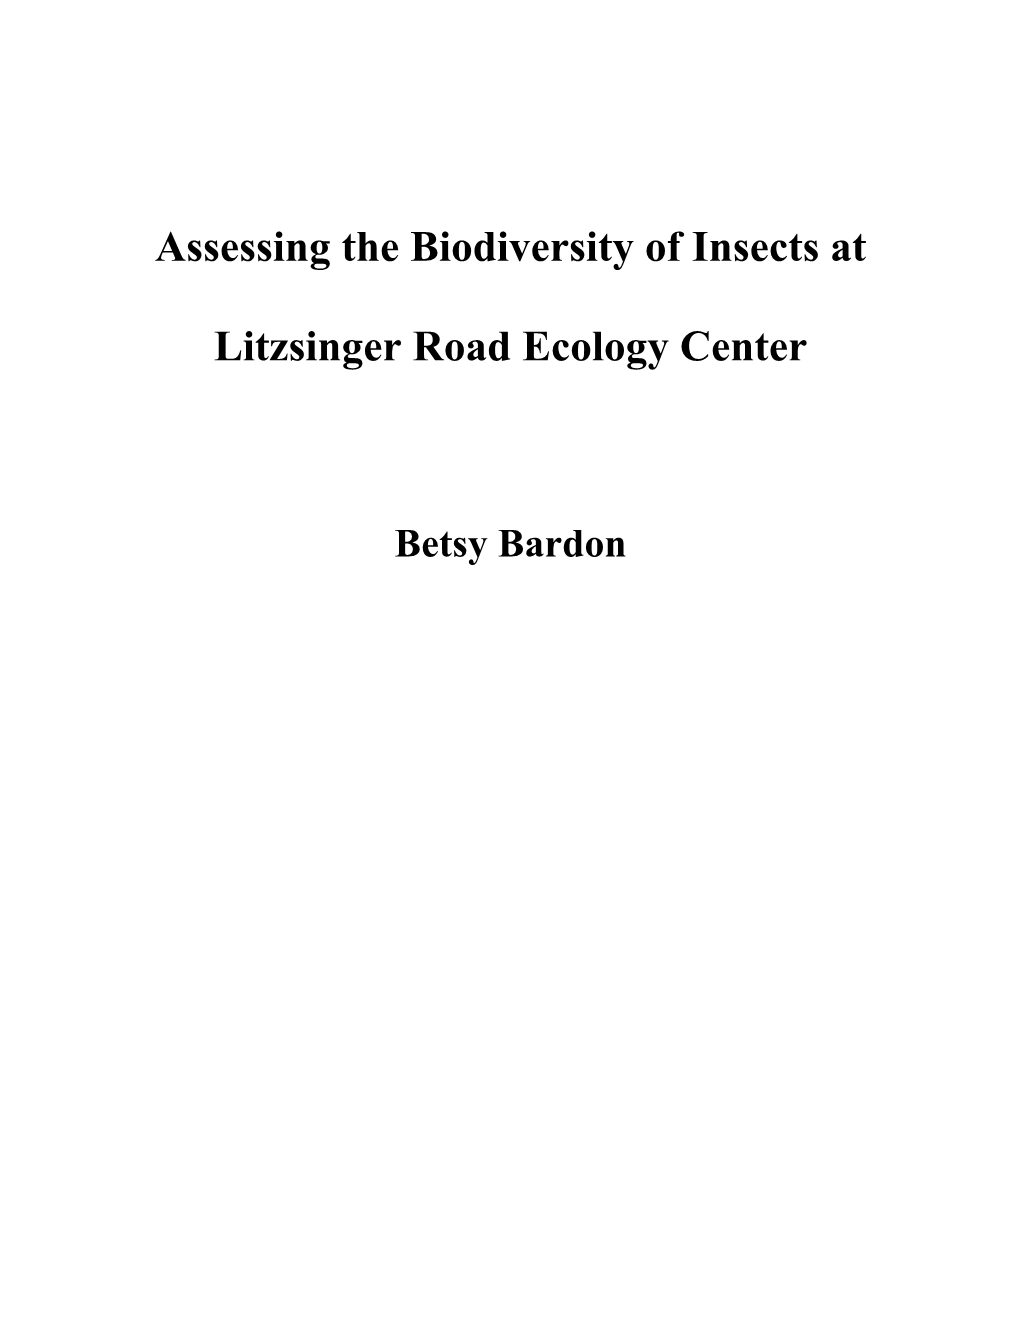 Assessing the Biodiversity of Insects at Litzsinger Road Ecology Center